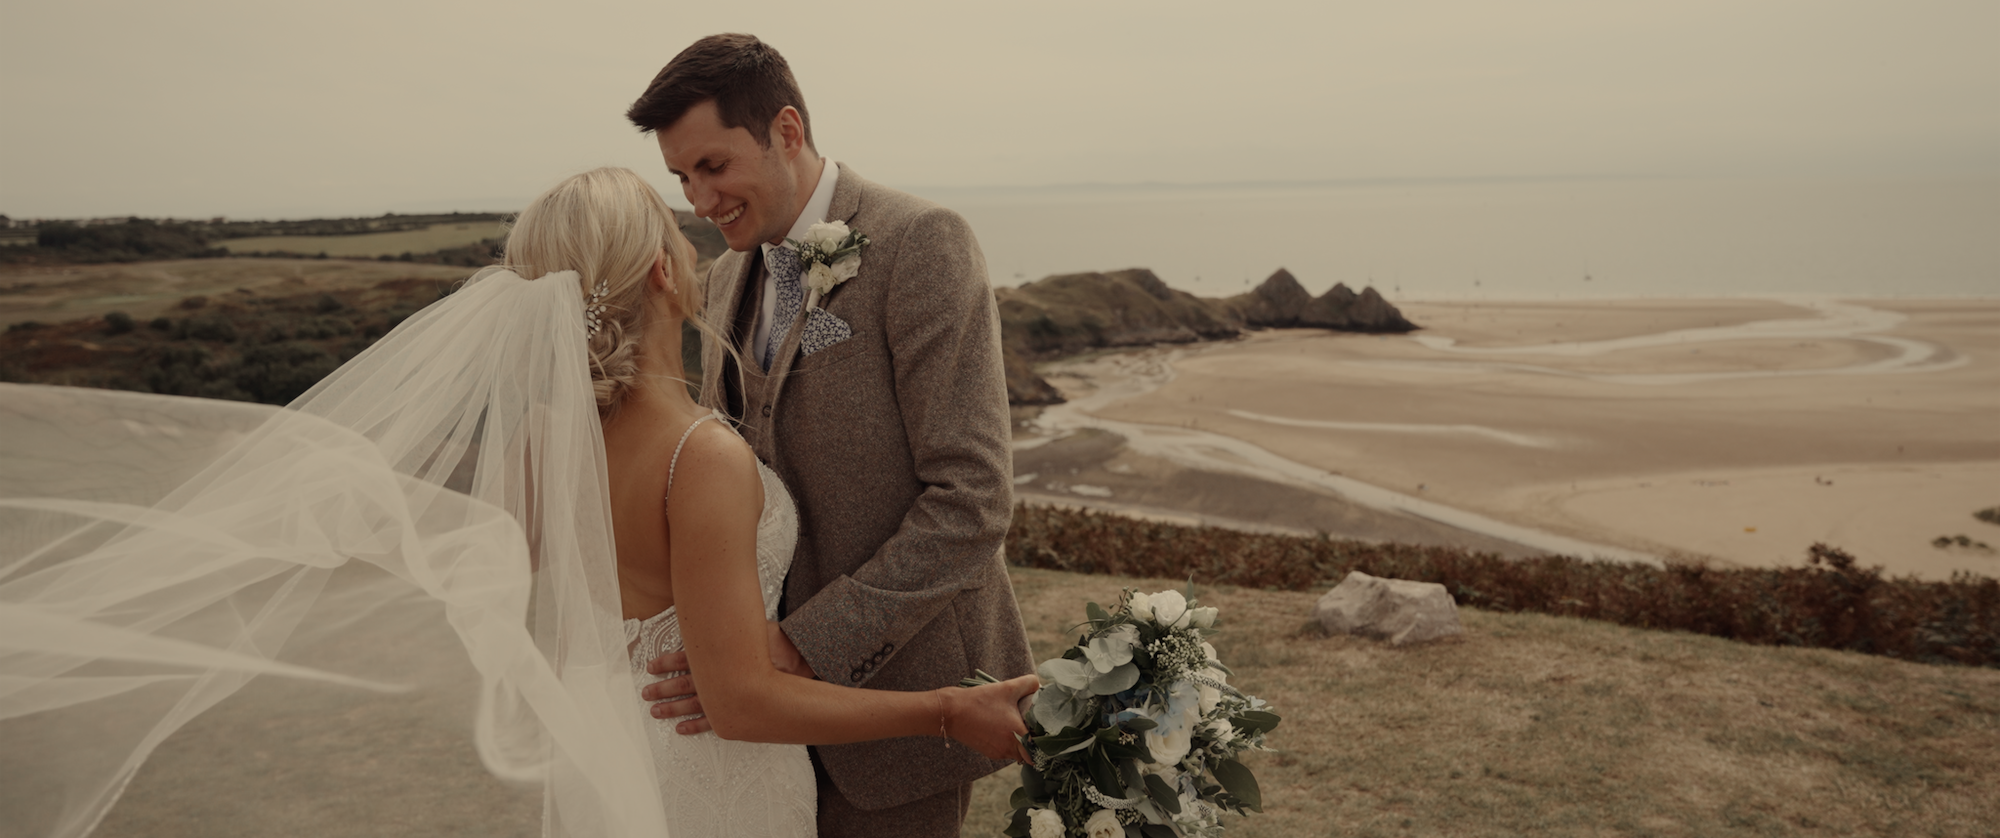 Oxwich Bay Hotel Wedding Videography by Ben Holbrook Films (Swansea South Wales).jpeg0.png